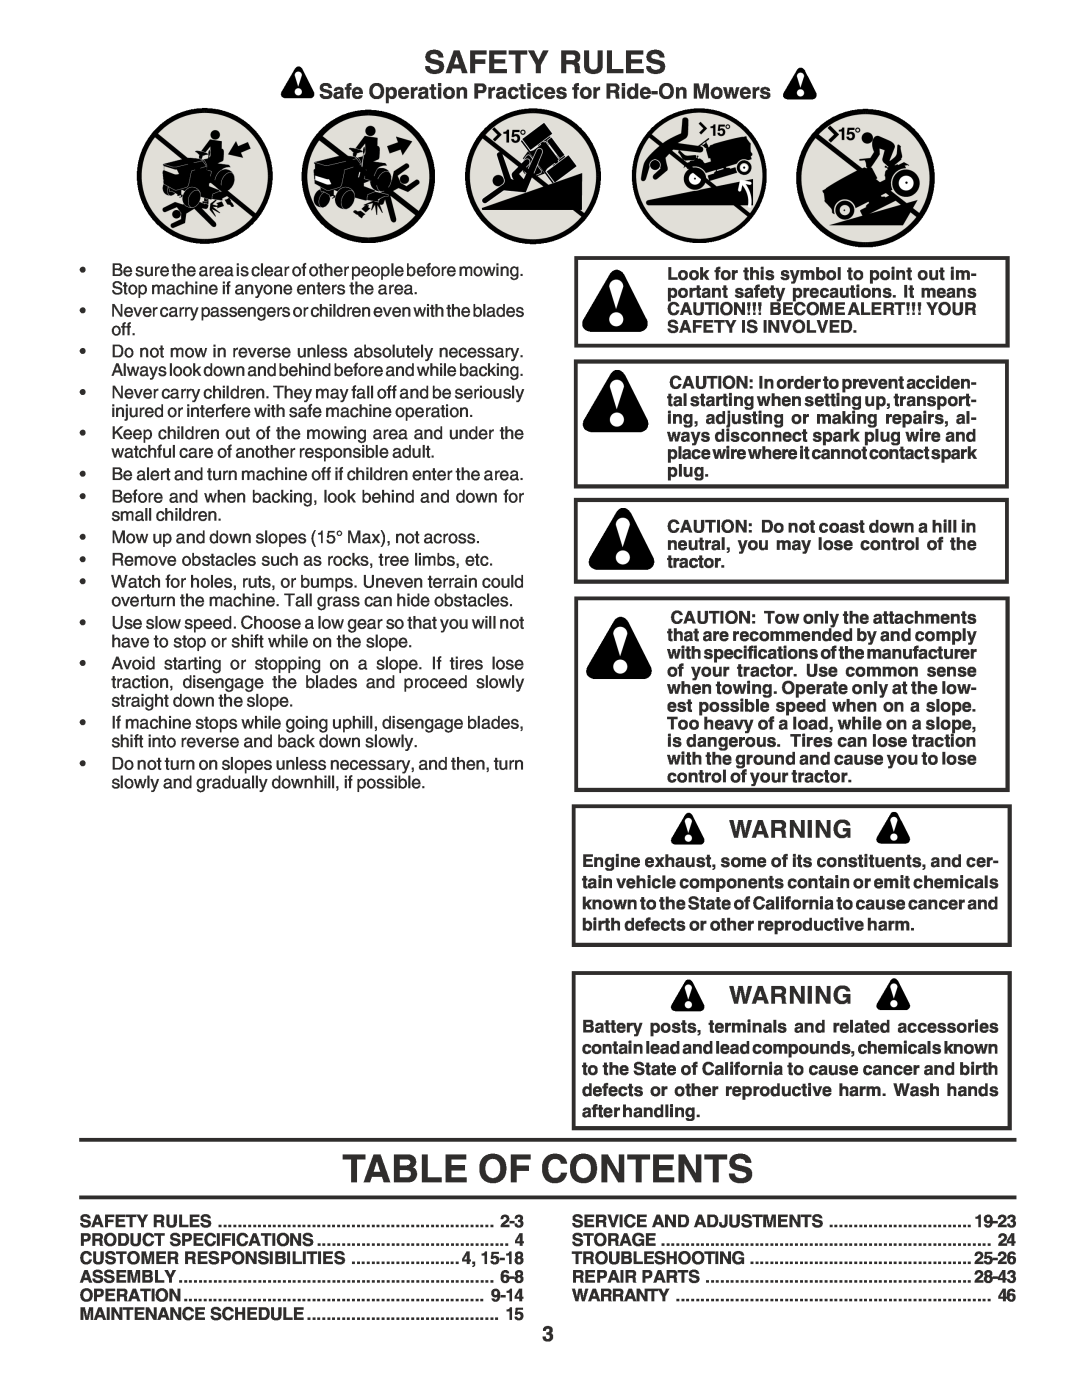 Poulan 183368 Table Of Contents, Safety Rules, Safe Operation Practices for Ride-On Mowers, 9-14, 19-23, 25-26, 28-43 